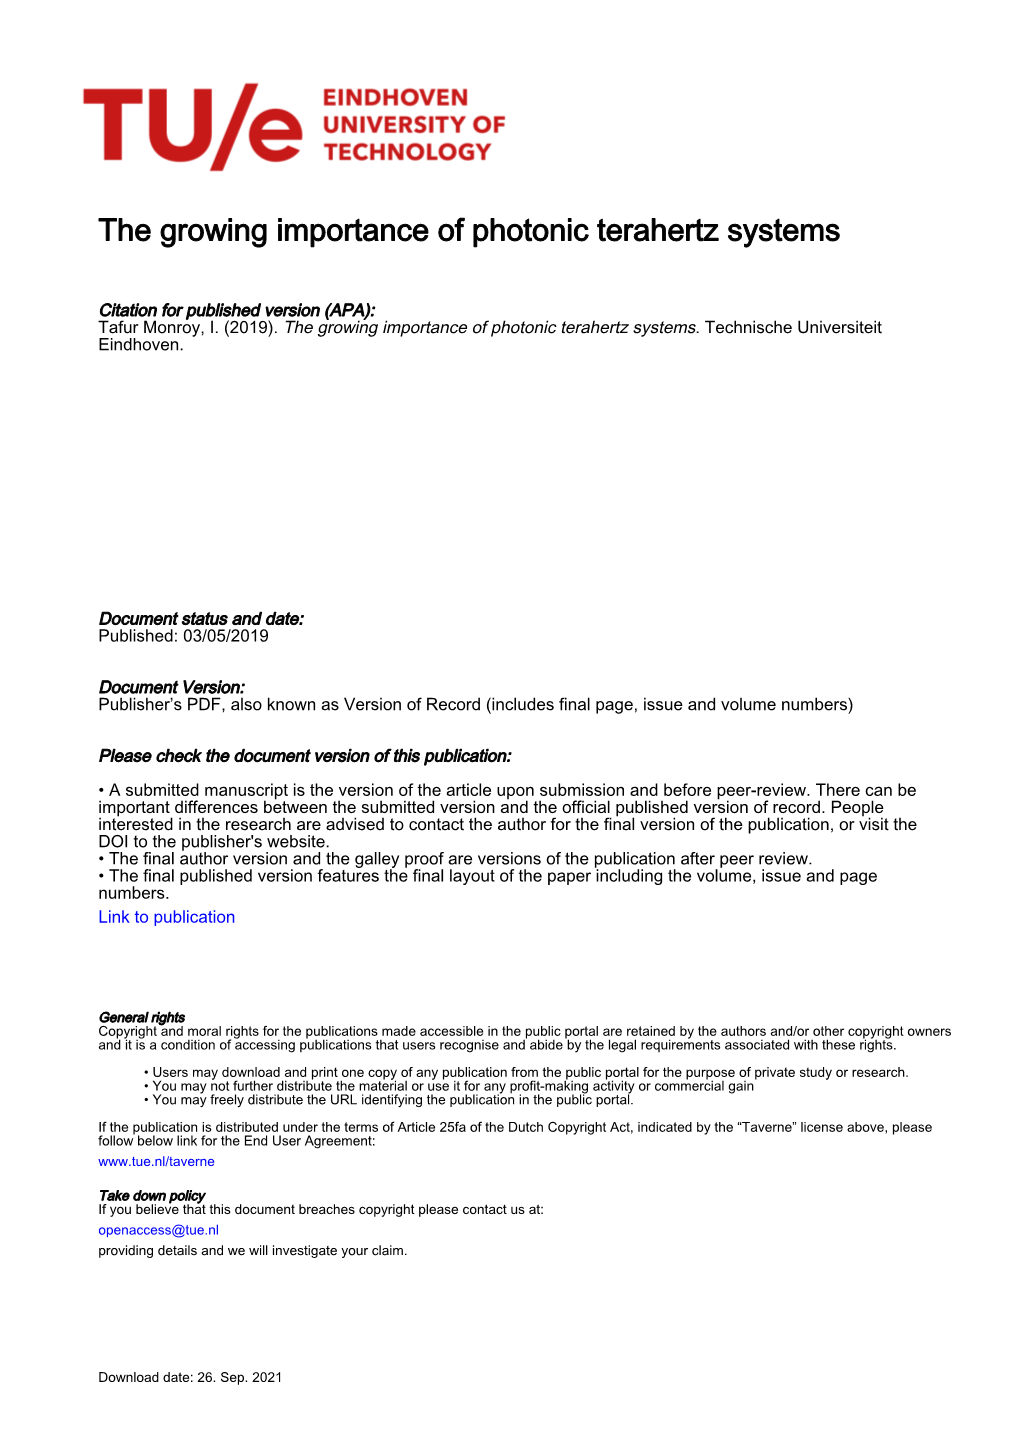 The Growing Importance of Photonic Terahertz Systems